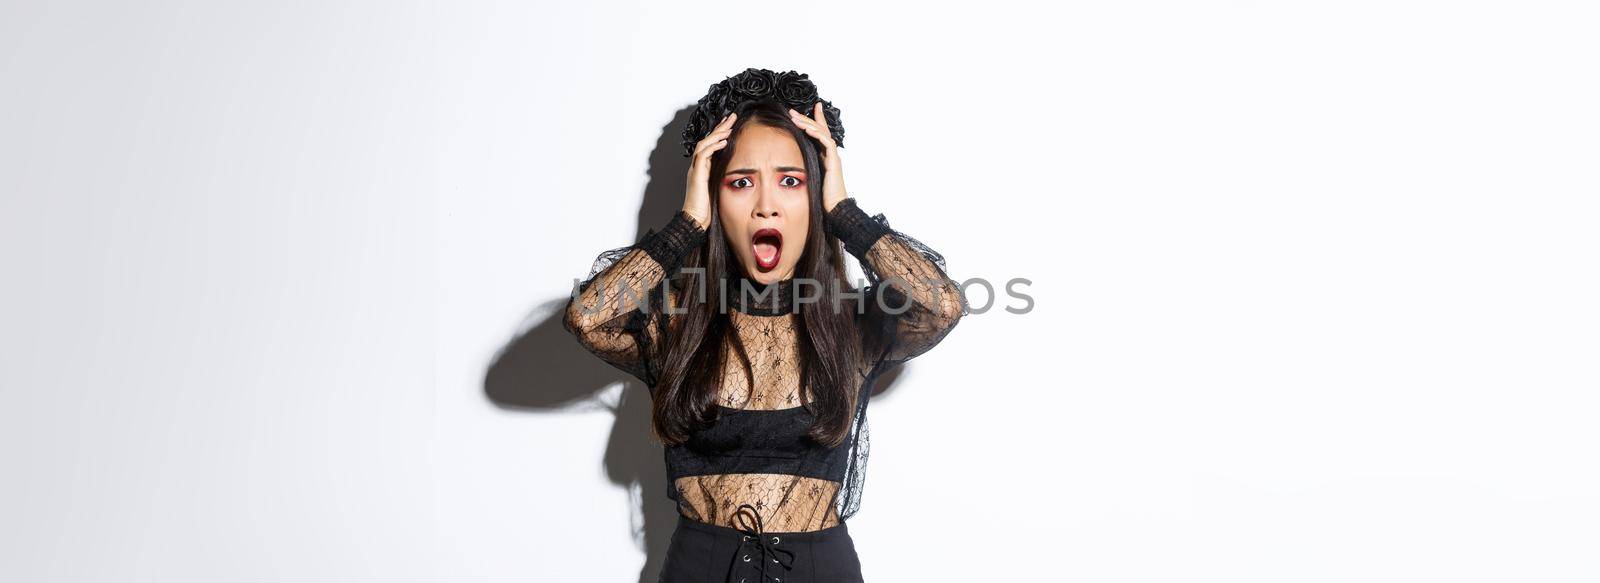 Image of horrified and shocked asian woman in gothic lace dress and wreath looking ambushed, wearing halloween costume, gasping and looking concerned, standing over white background.